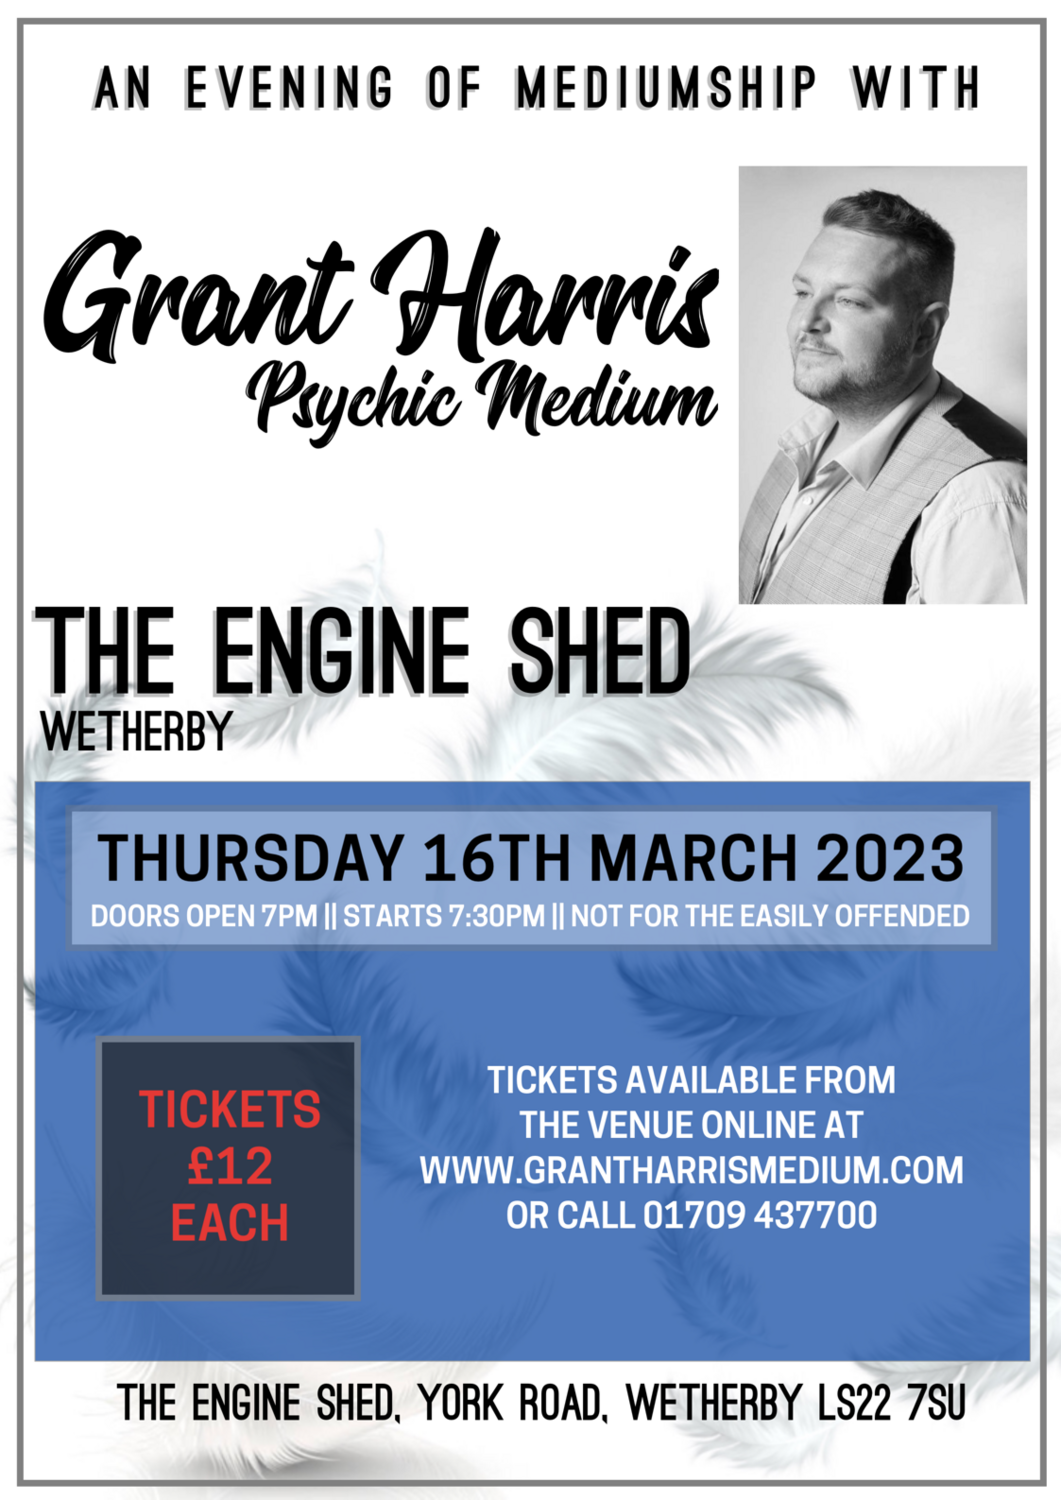 The Engine Shed, Wetherby, Thursday 16th March 2023